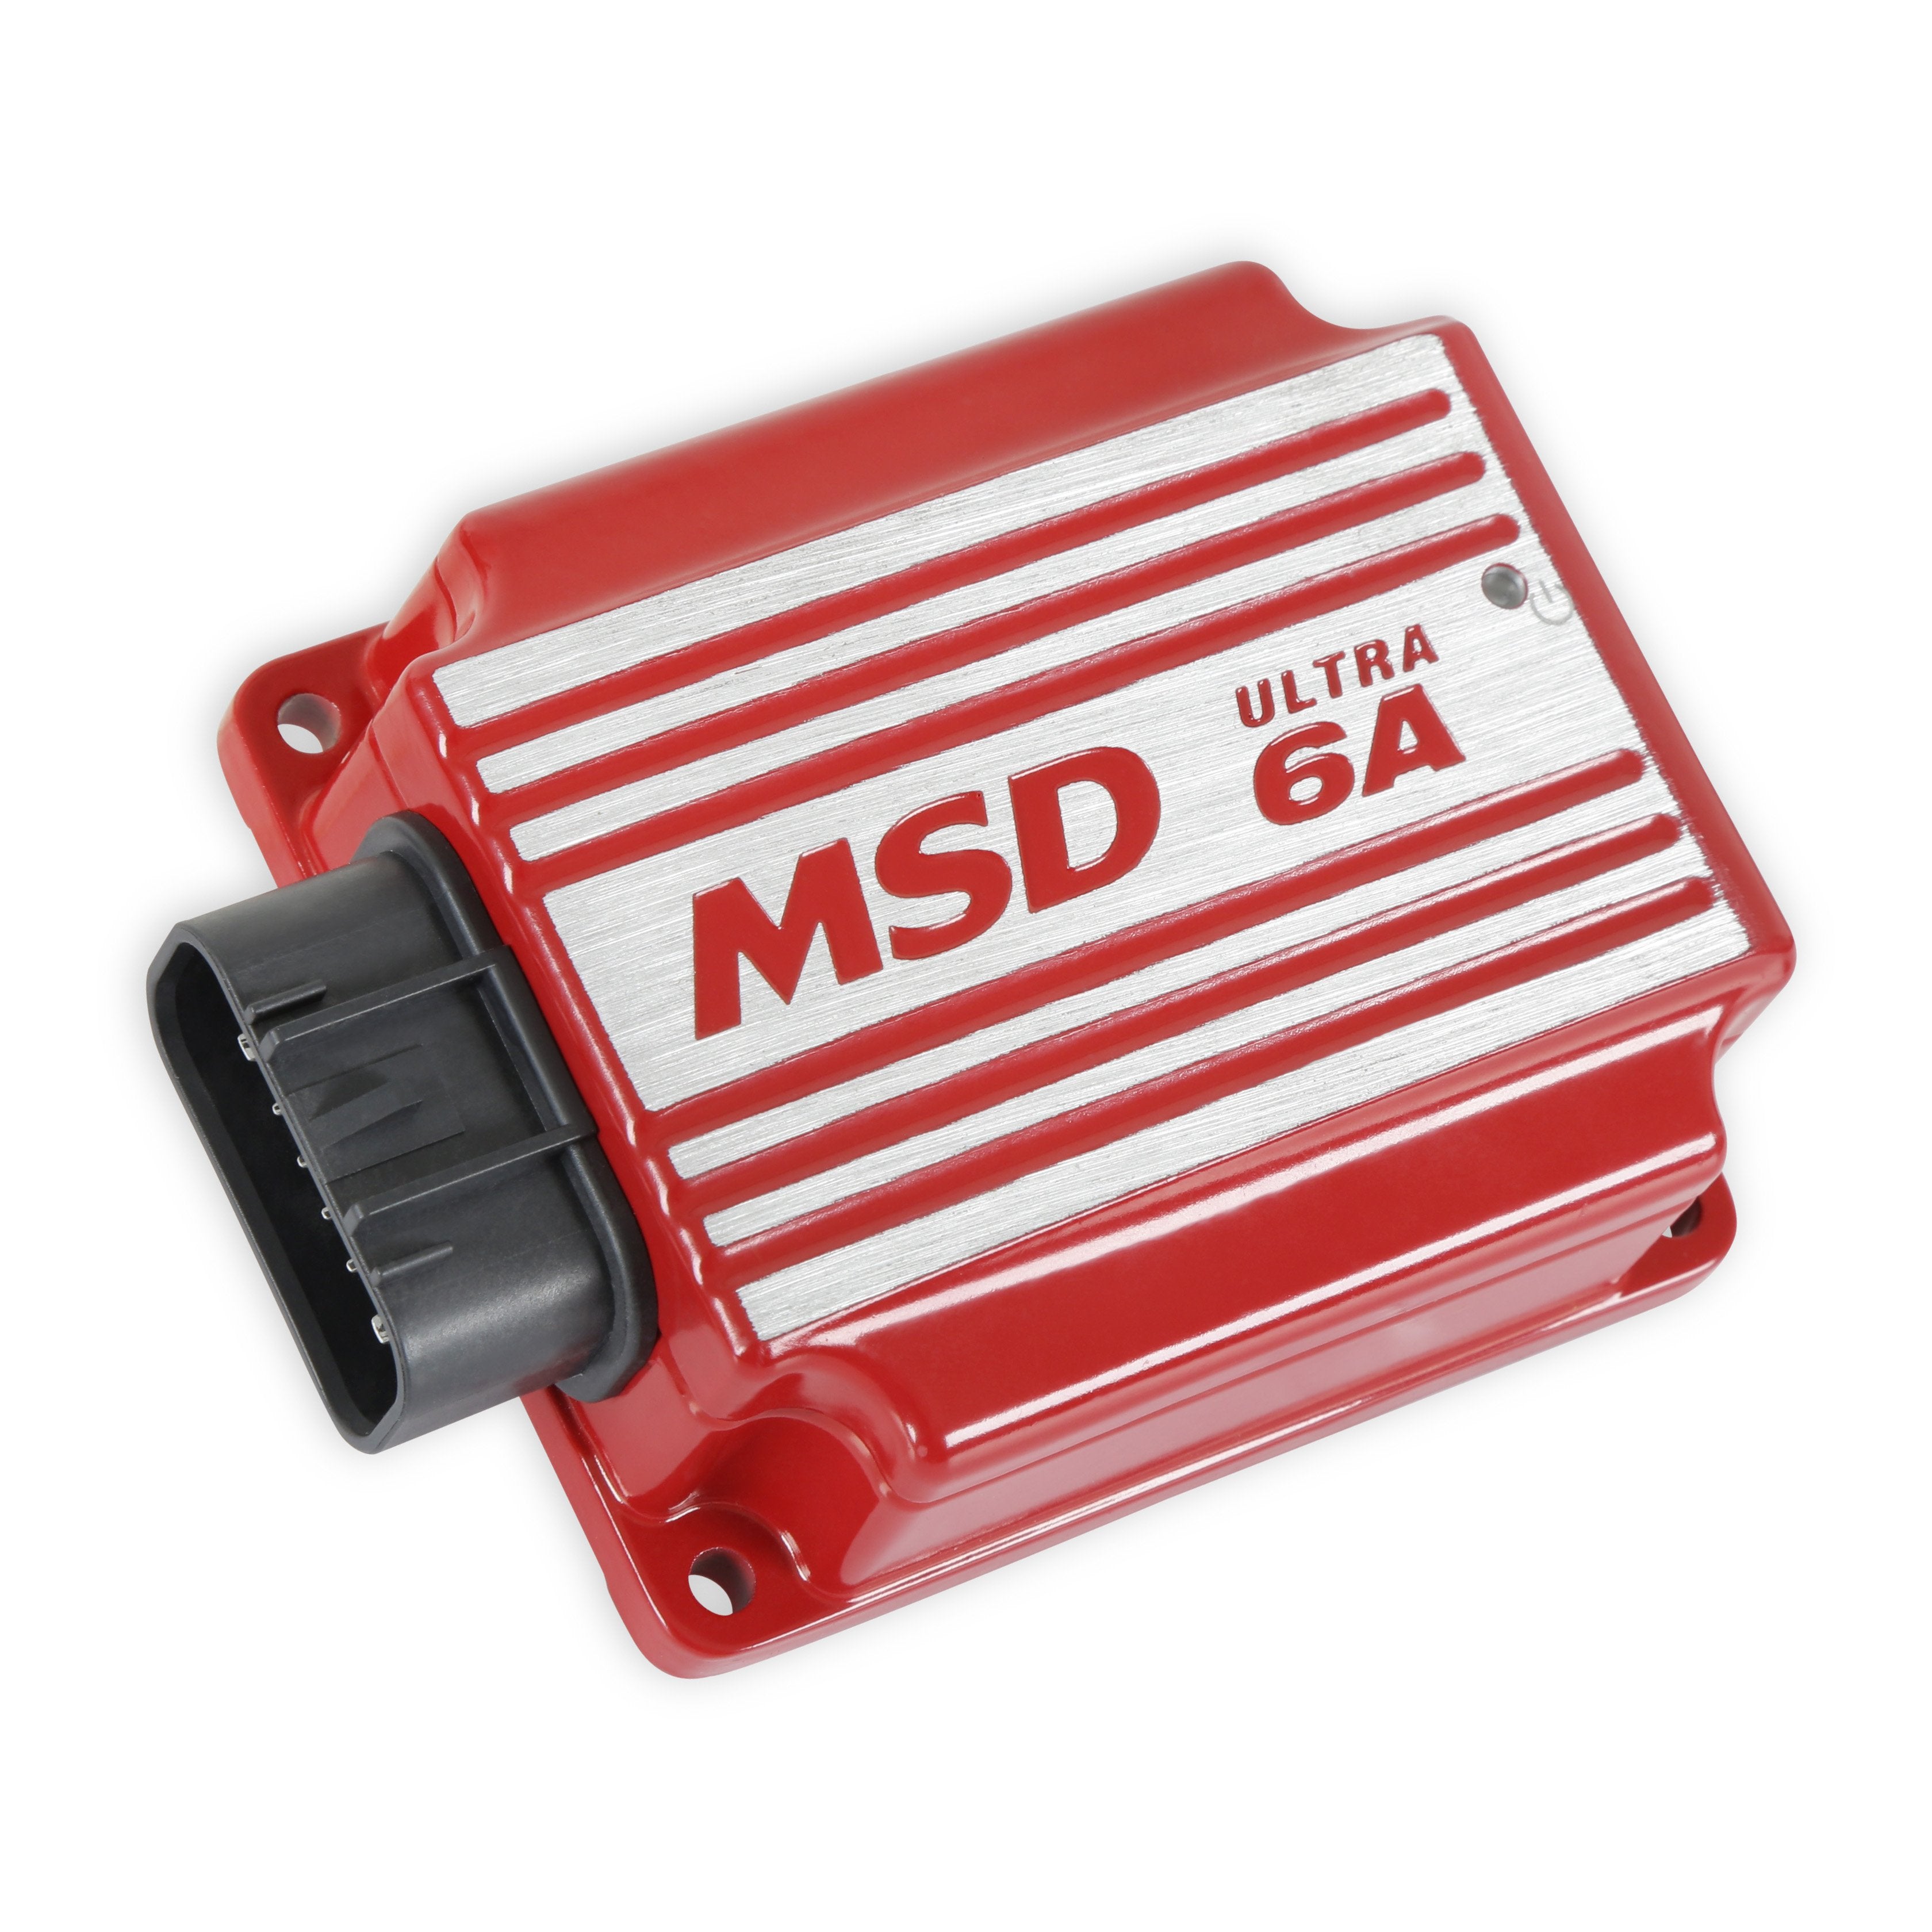 MSD Performance 6202 MSD ULTRA 6A IGNITION CONTROL - RED